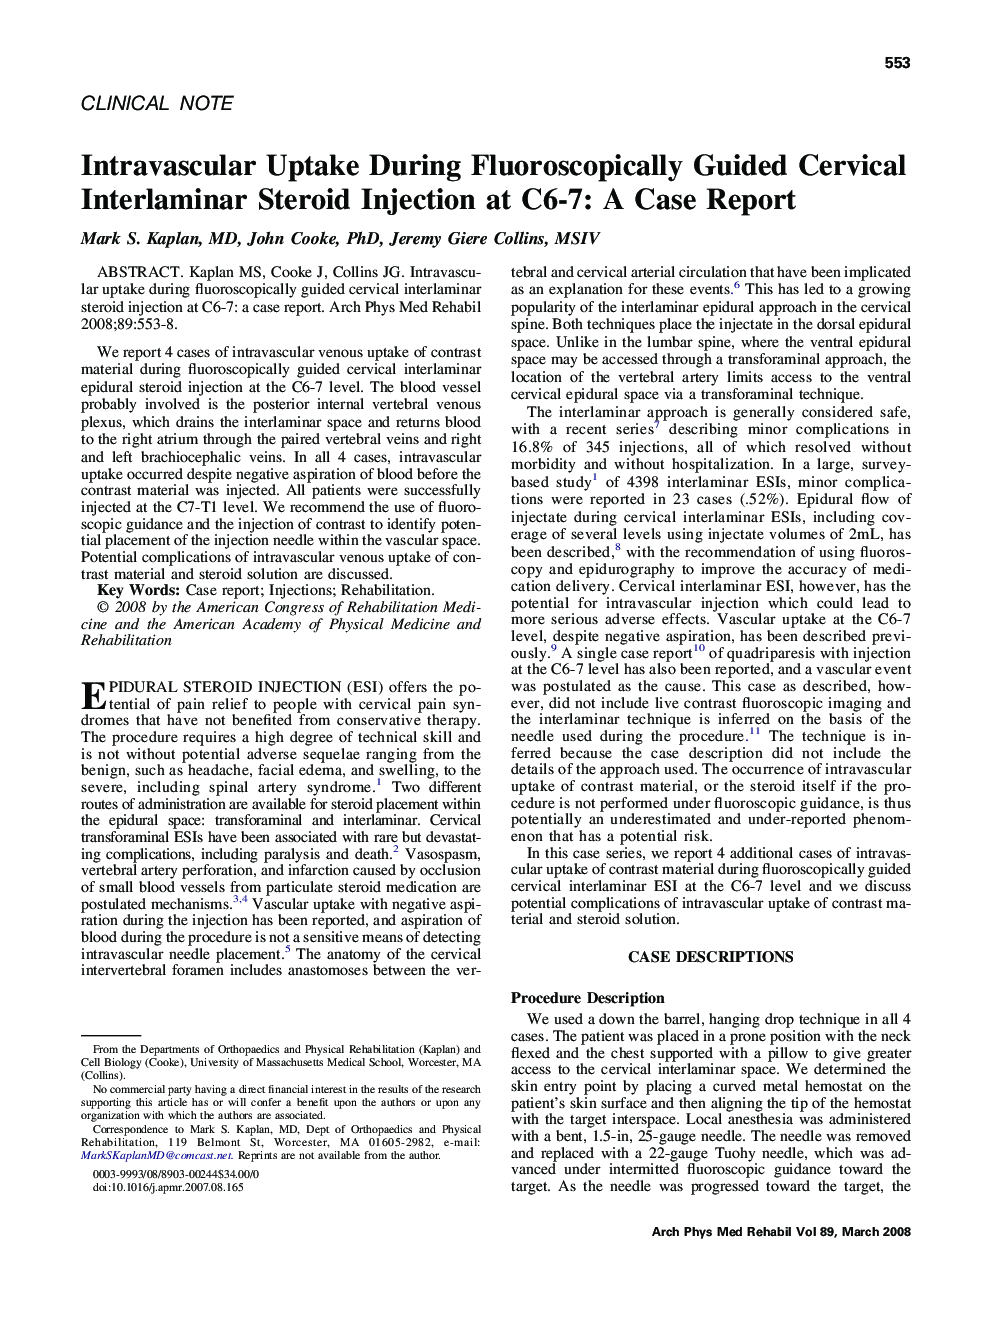 Intravascular Uptake During Fluoroscopically Guided Cervical Interlaminar Steroid Injection at C6-7: A Case Report 